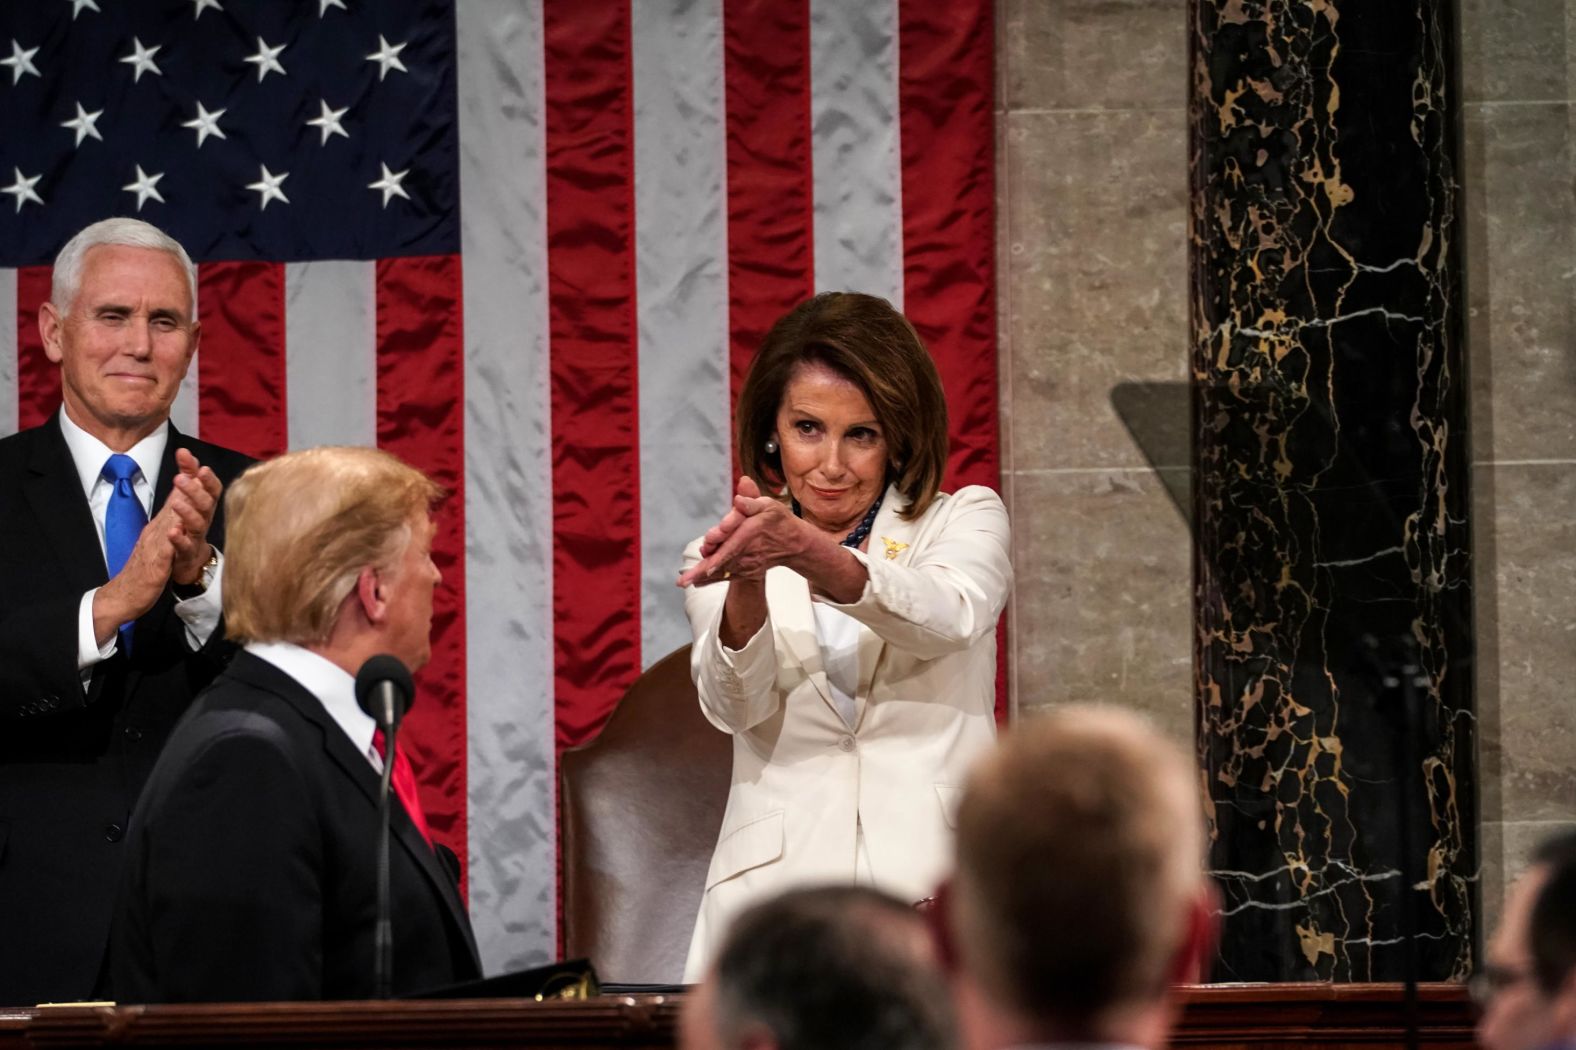 Pelosi and Pence clap during Trump's State of the Union address in February 2019. Because of the record-long government shutdown, <a href="index.php?page=&url=https%3A%2F%2Fwww.cnn.com%2F2019%2F02%2F05%2Fpolitics%2Fgallery%2Fstate-of-the-union-2019%2Findex.html" target="_blank">Trump's speech</a> came a week later than originally planned.